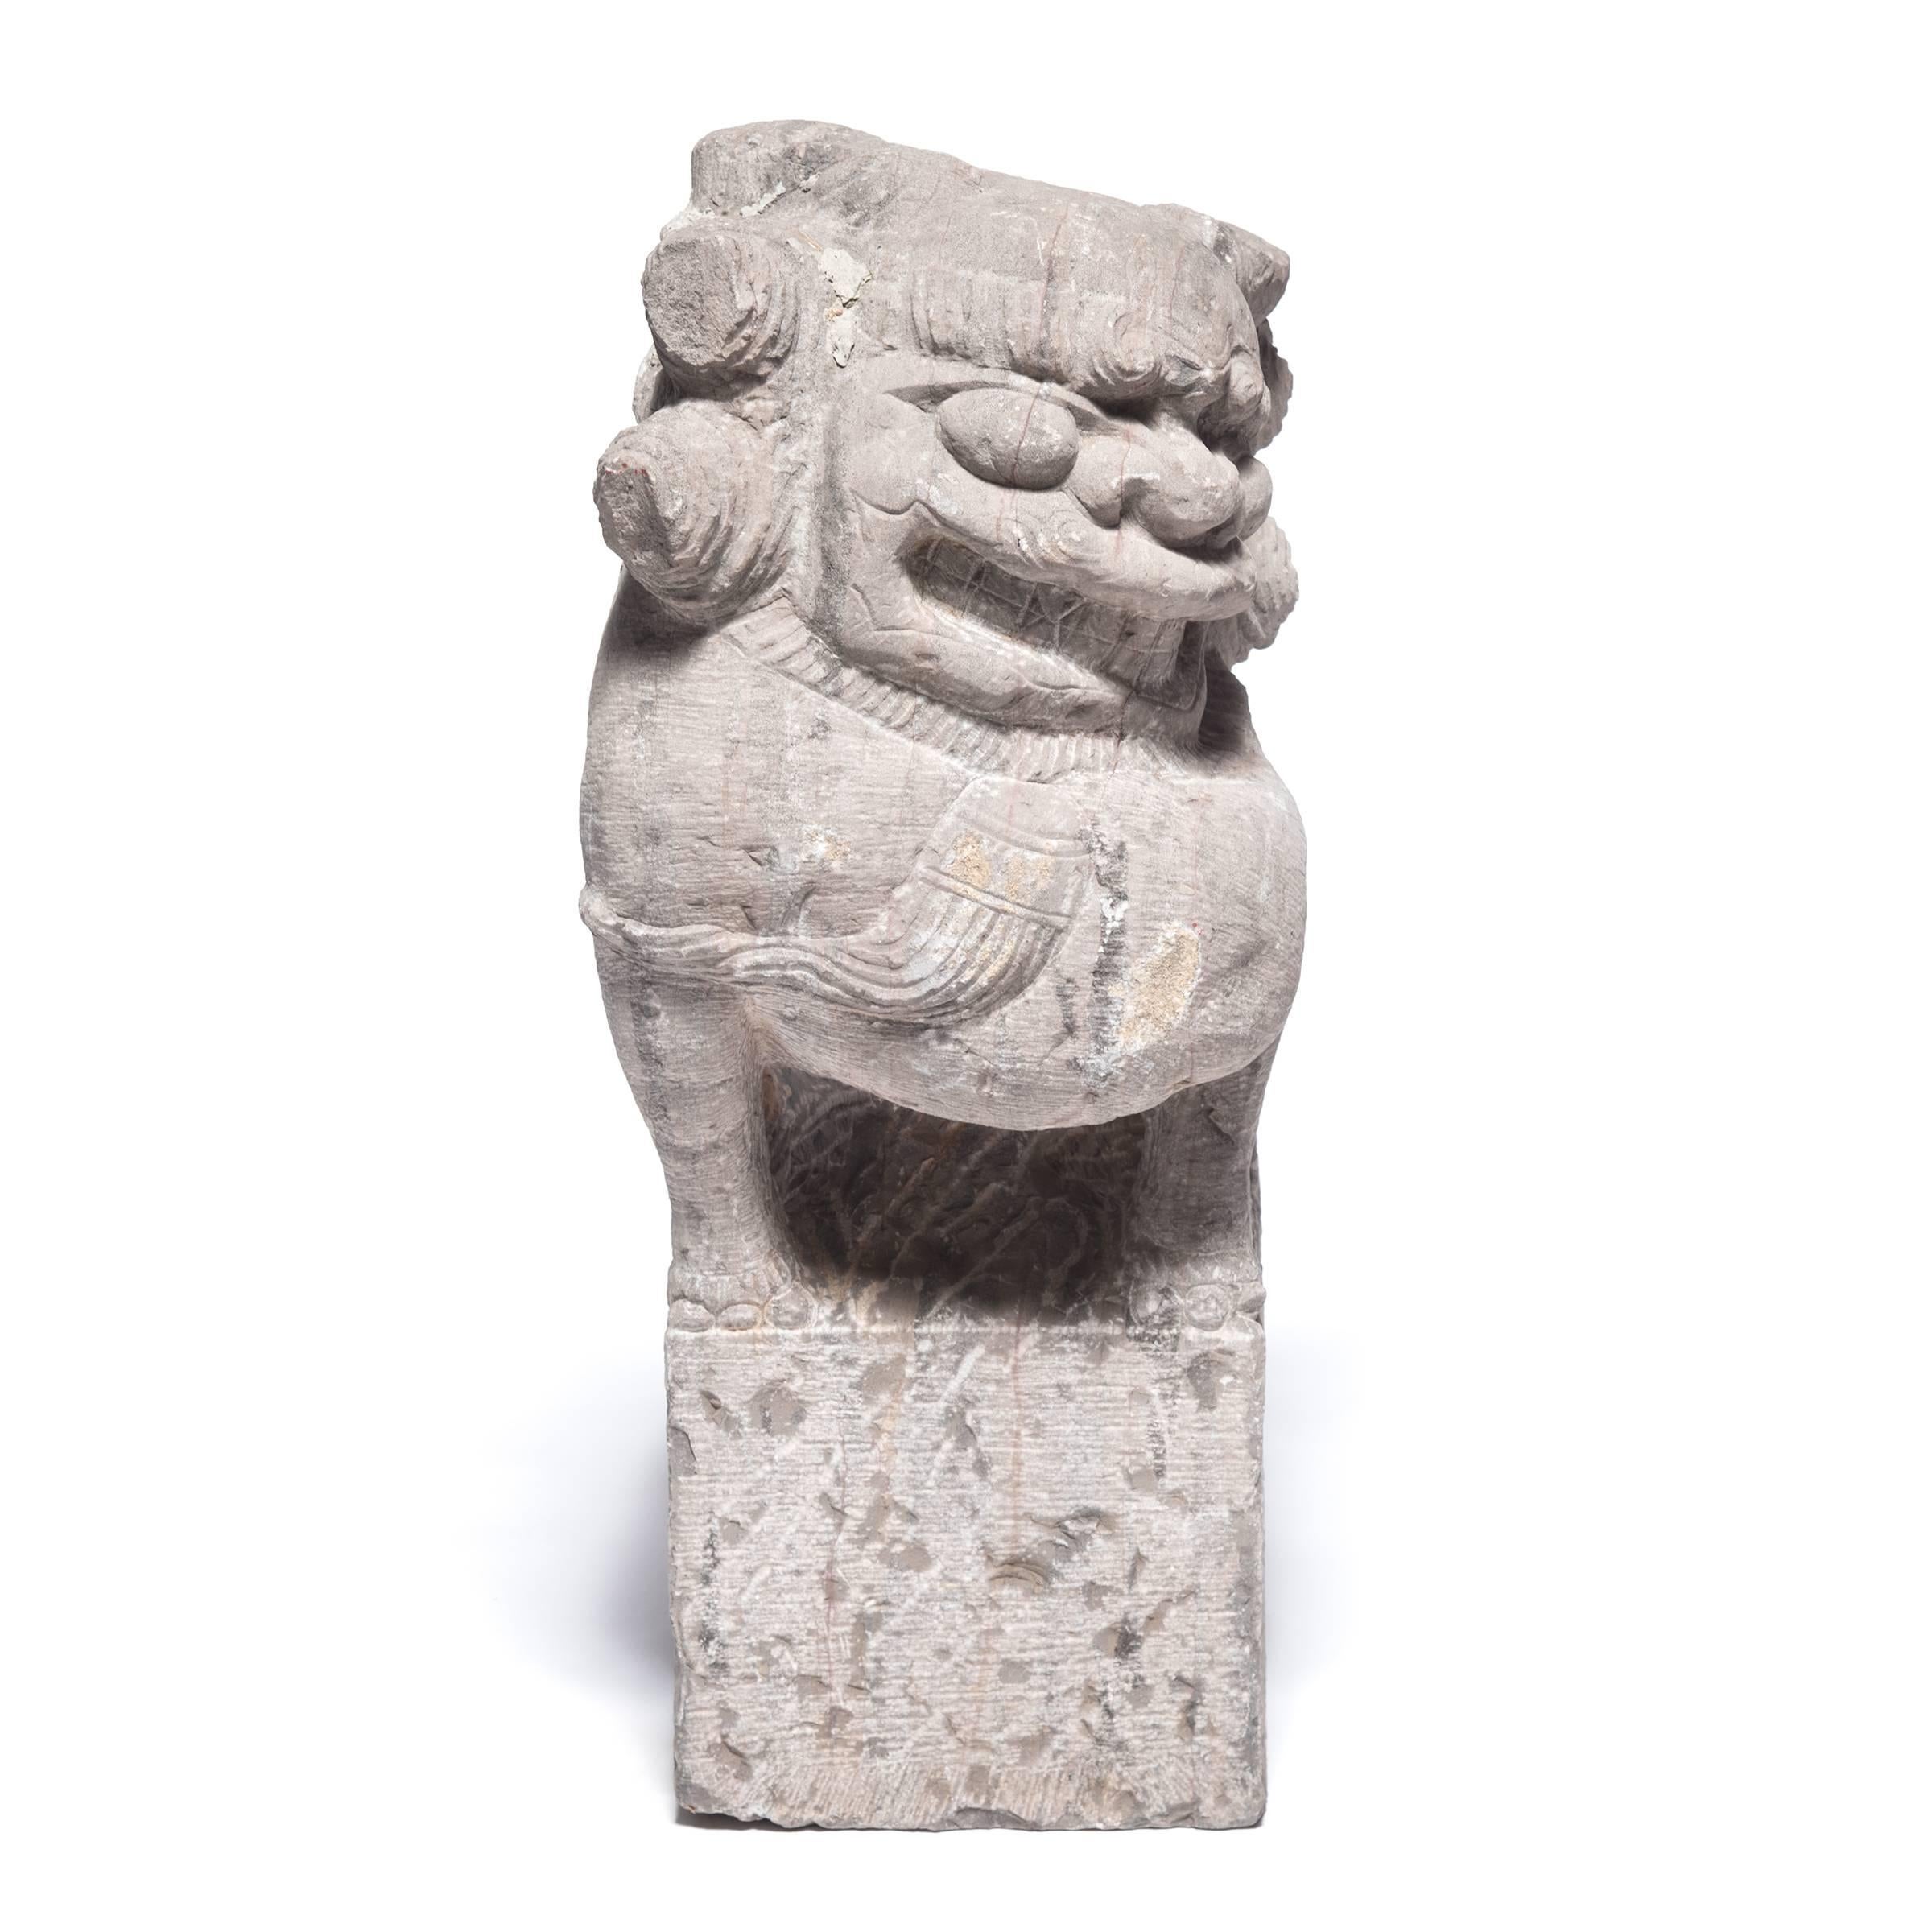 This pair of 19th century carved limestone Fu dogs with sinister smiles and furled brows once guarded the entrance to one of provincial China's grand homes. One peers up and the other down, both topped with carved manes that have bells and tassels.